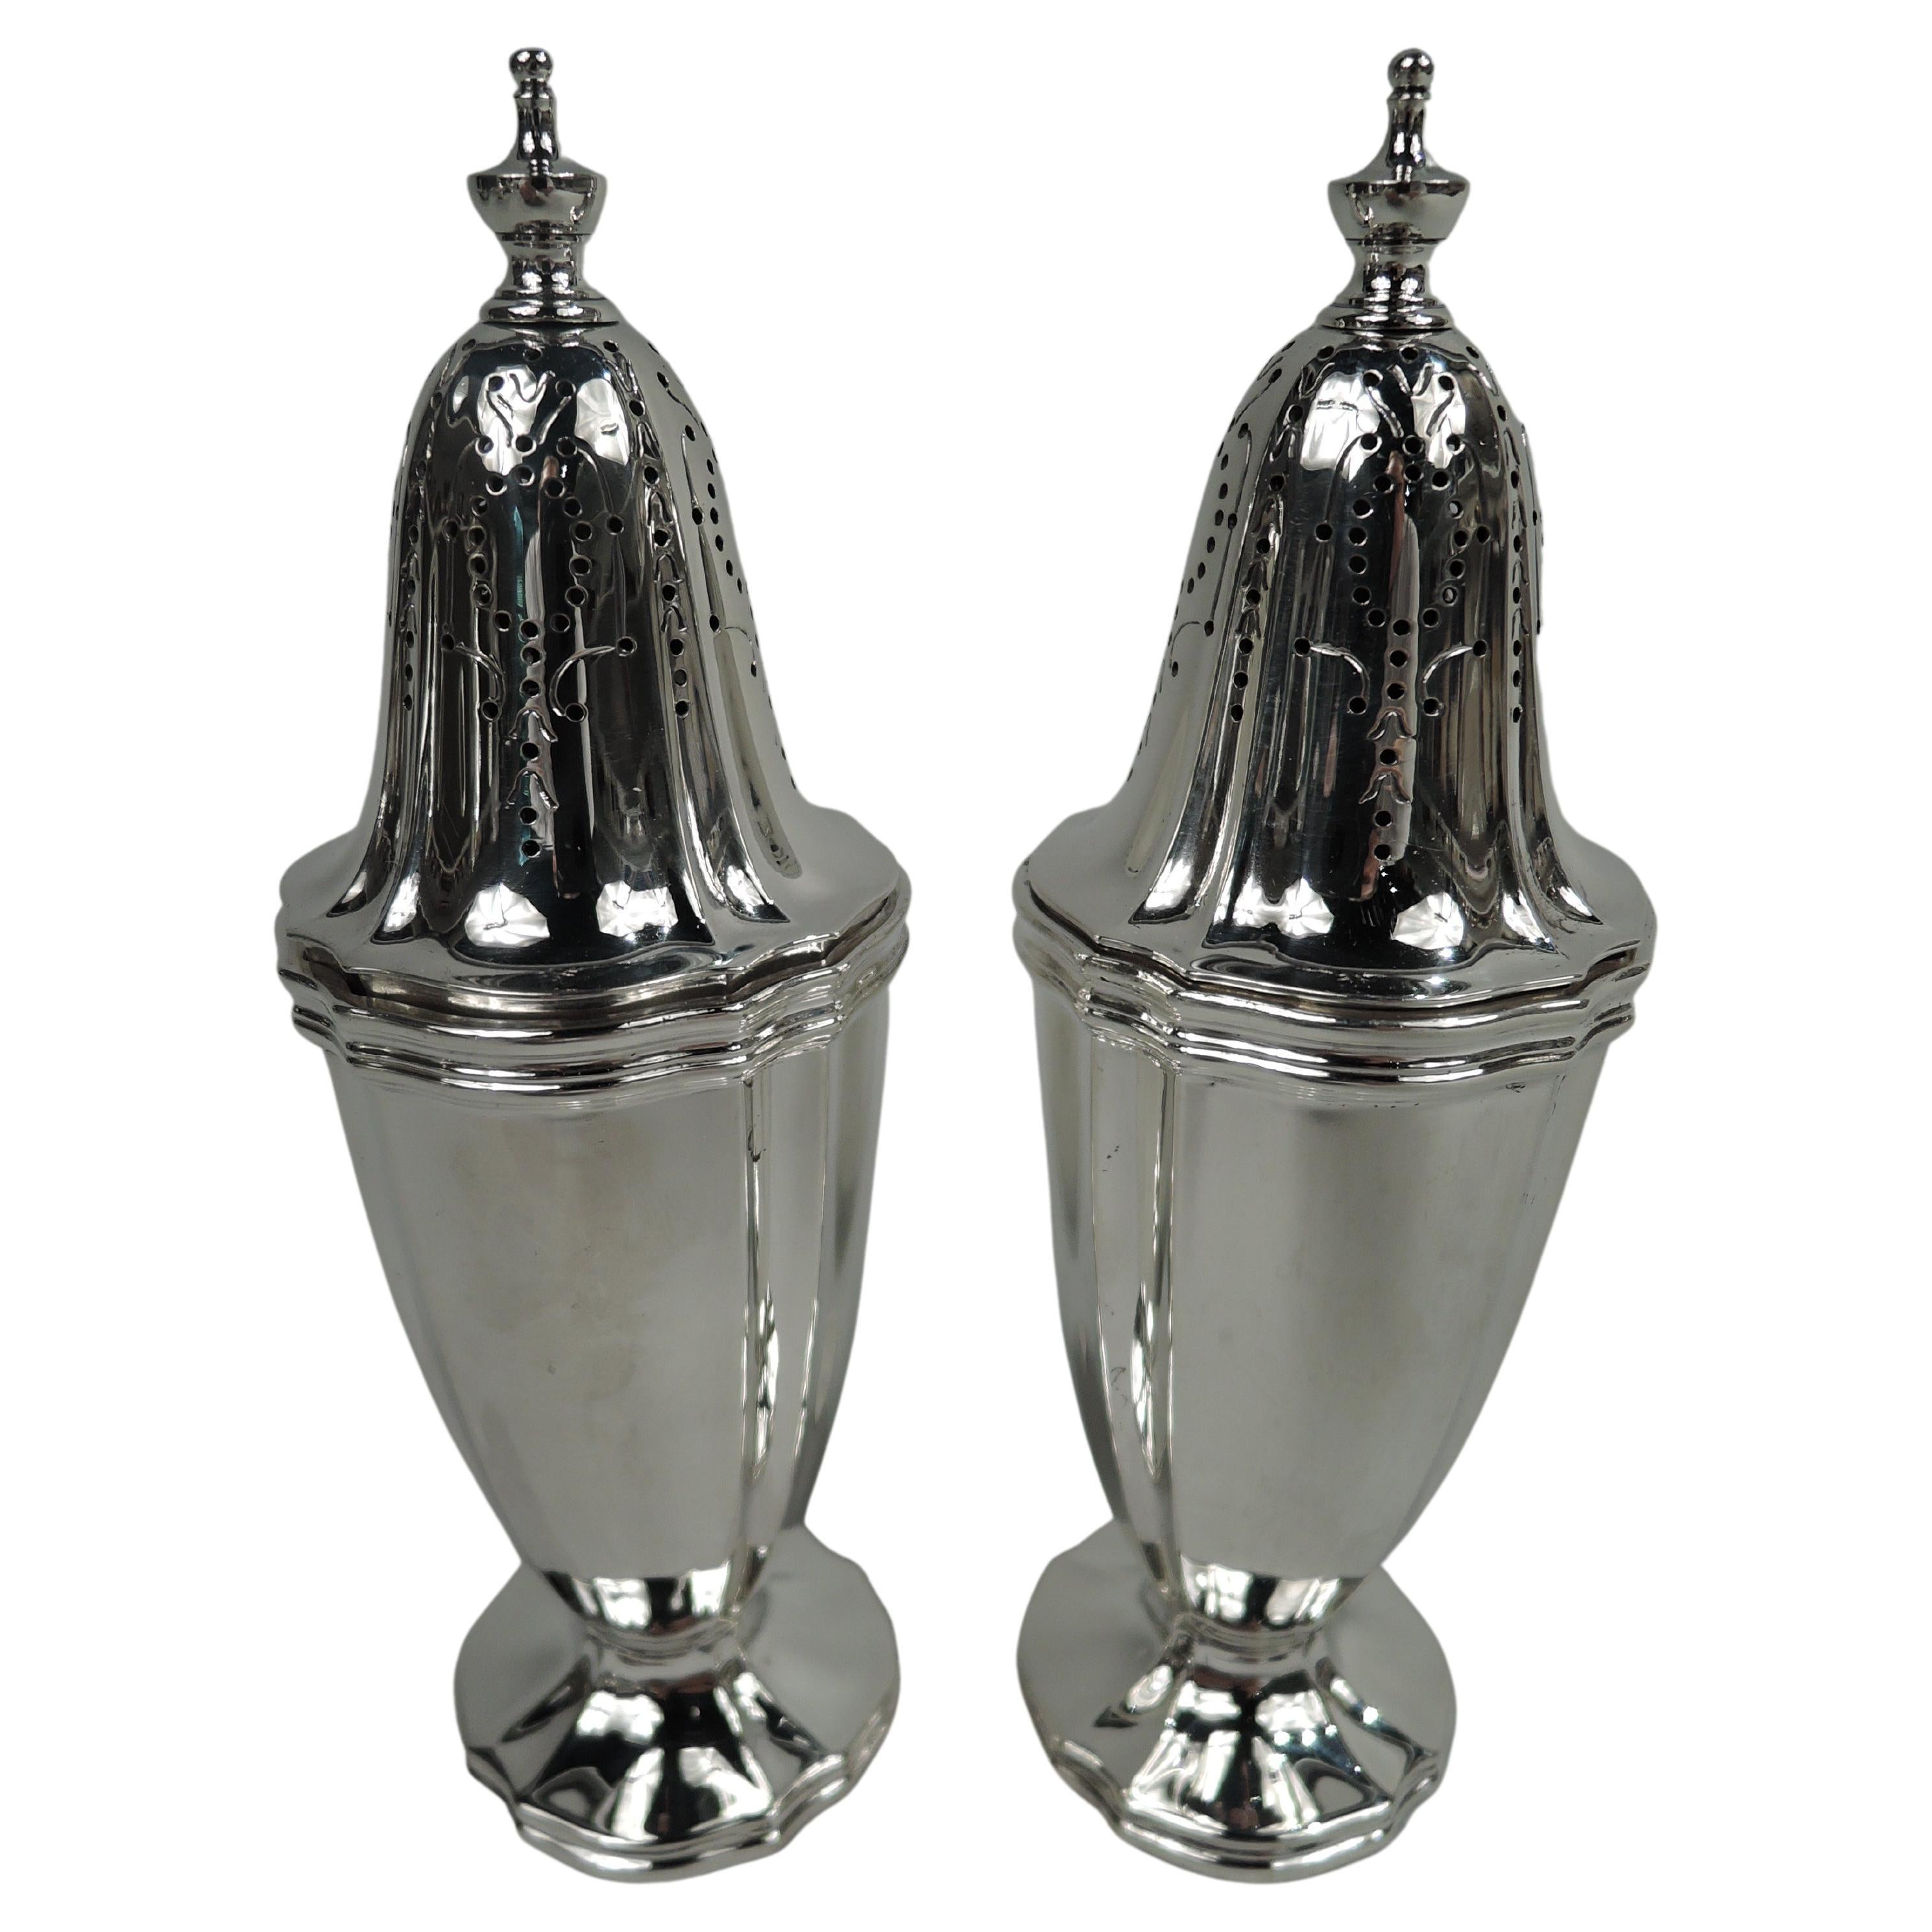 Pair of Antique Tiffany Edwardian Classical Salt & Pepper Shakers